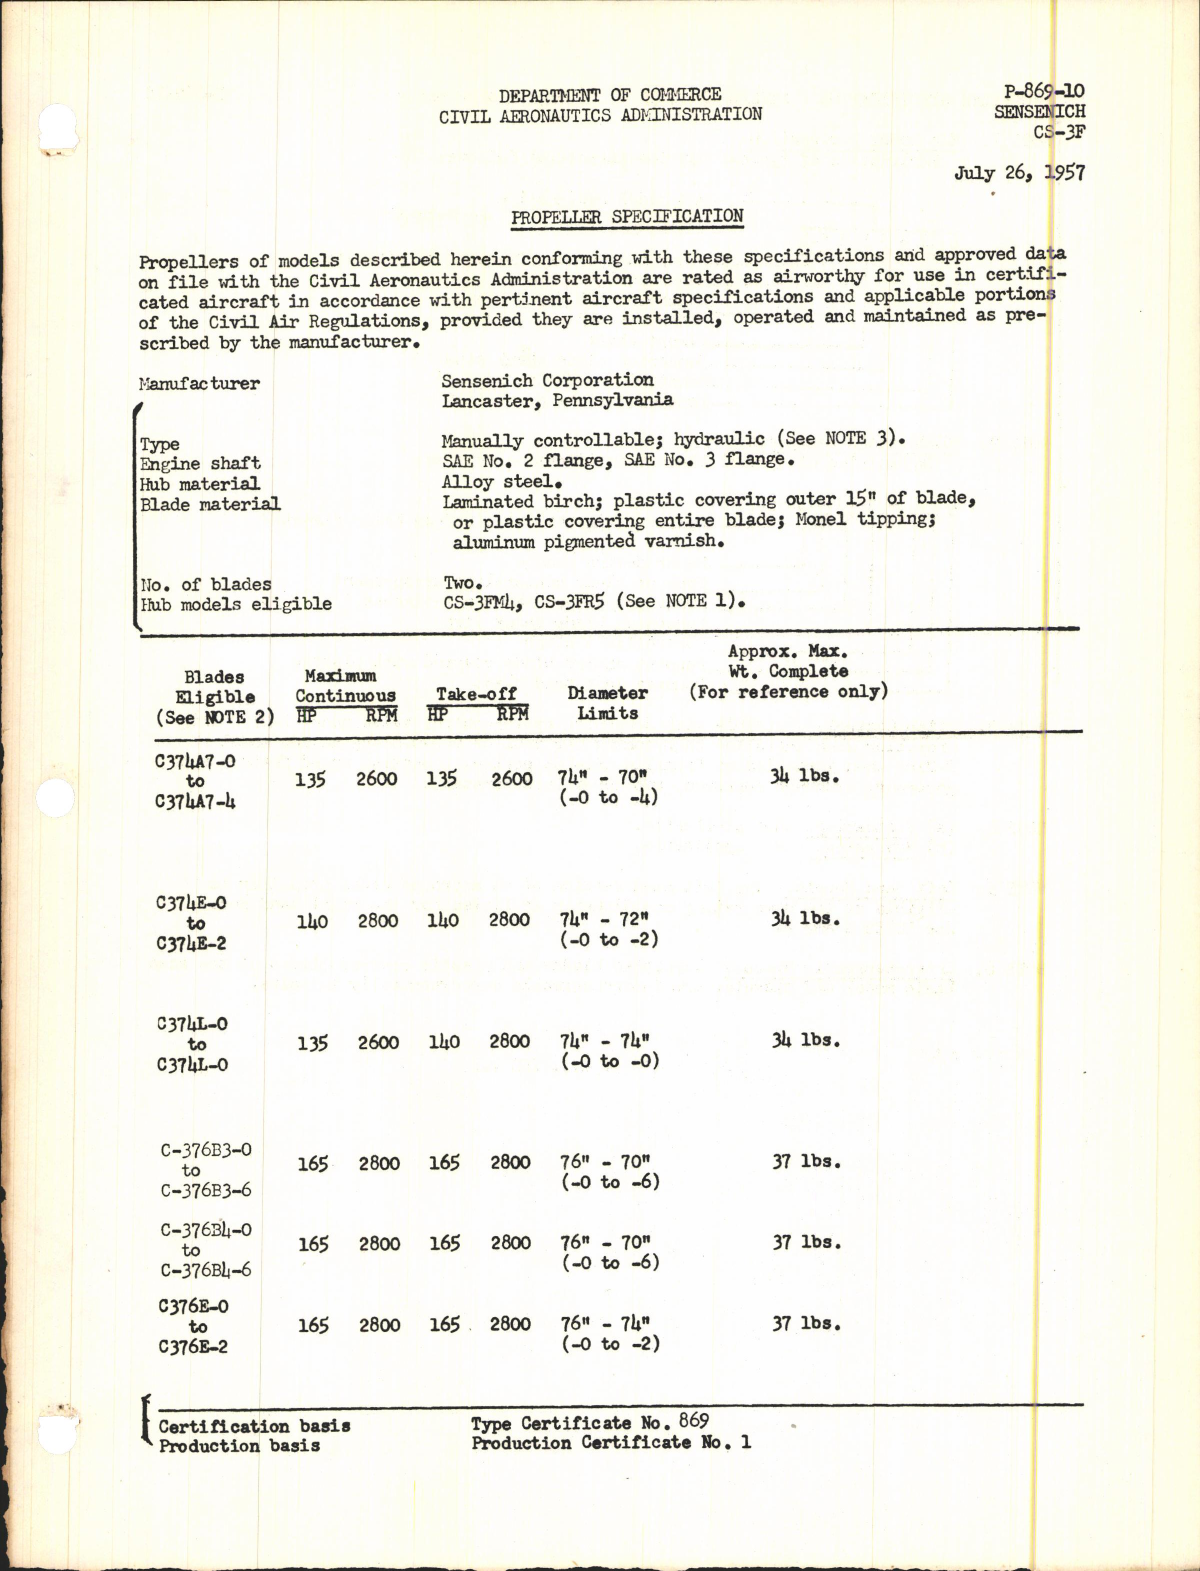 Sample page 1 from AirCorps Library document: CS-3F